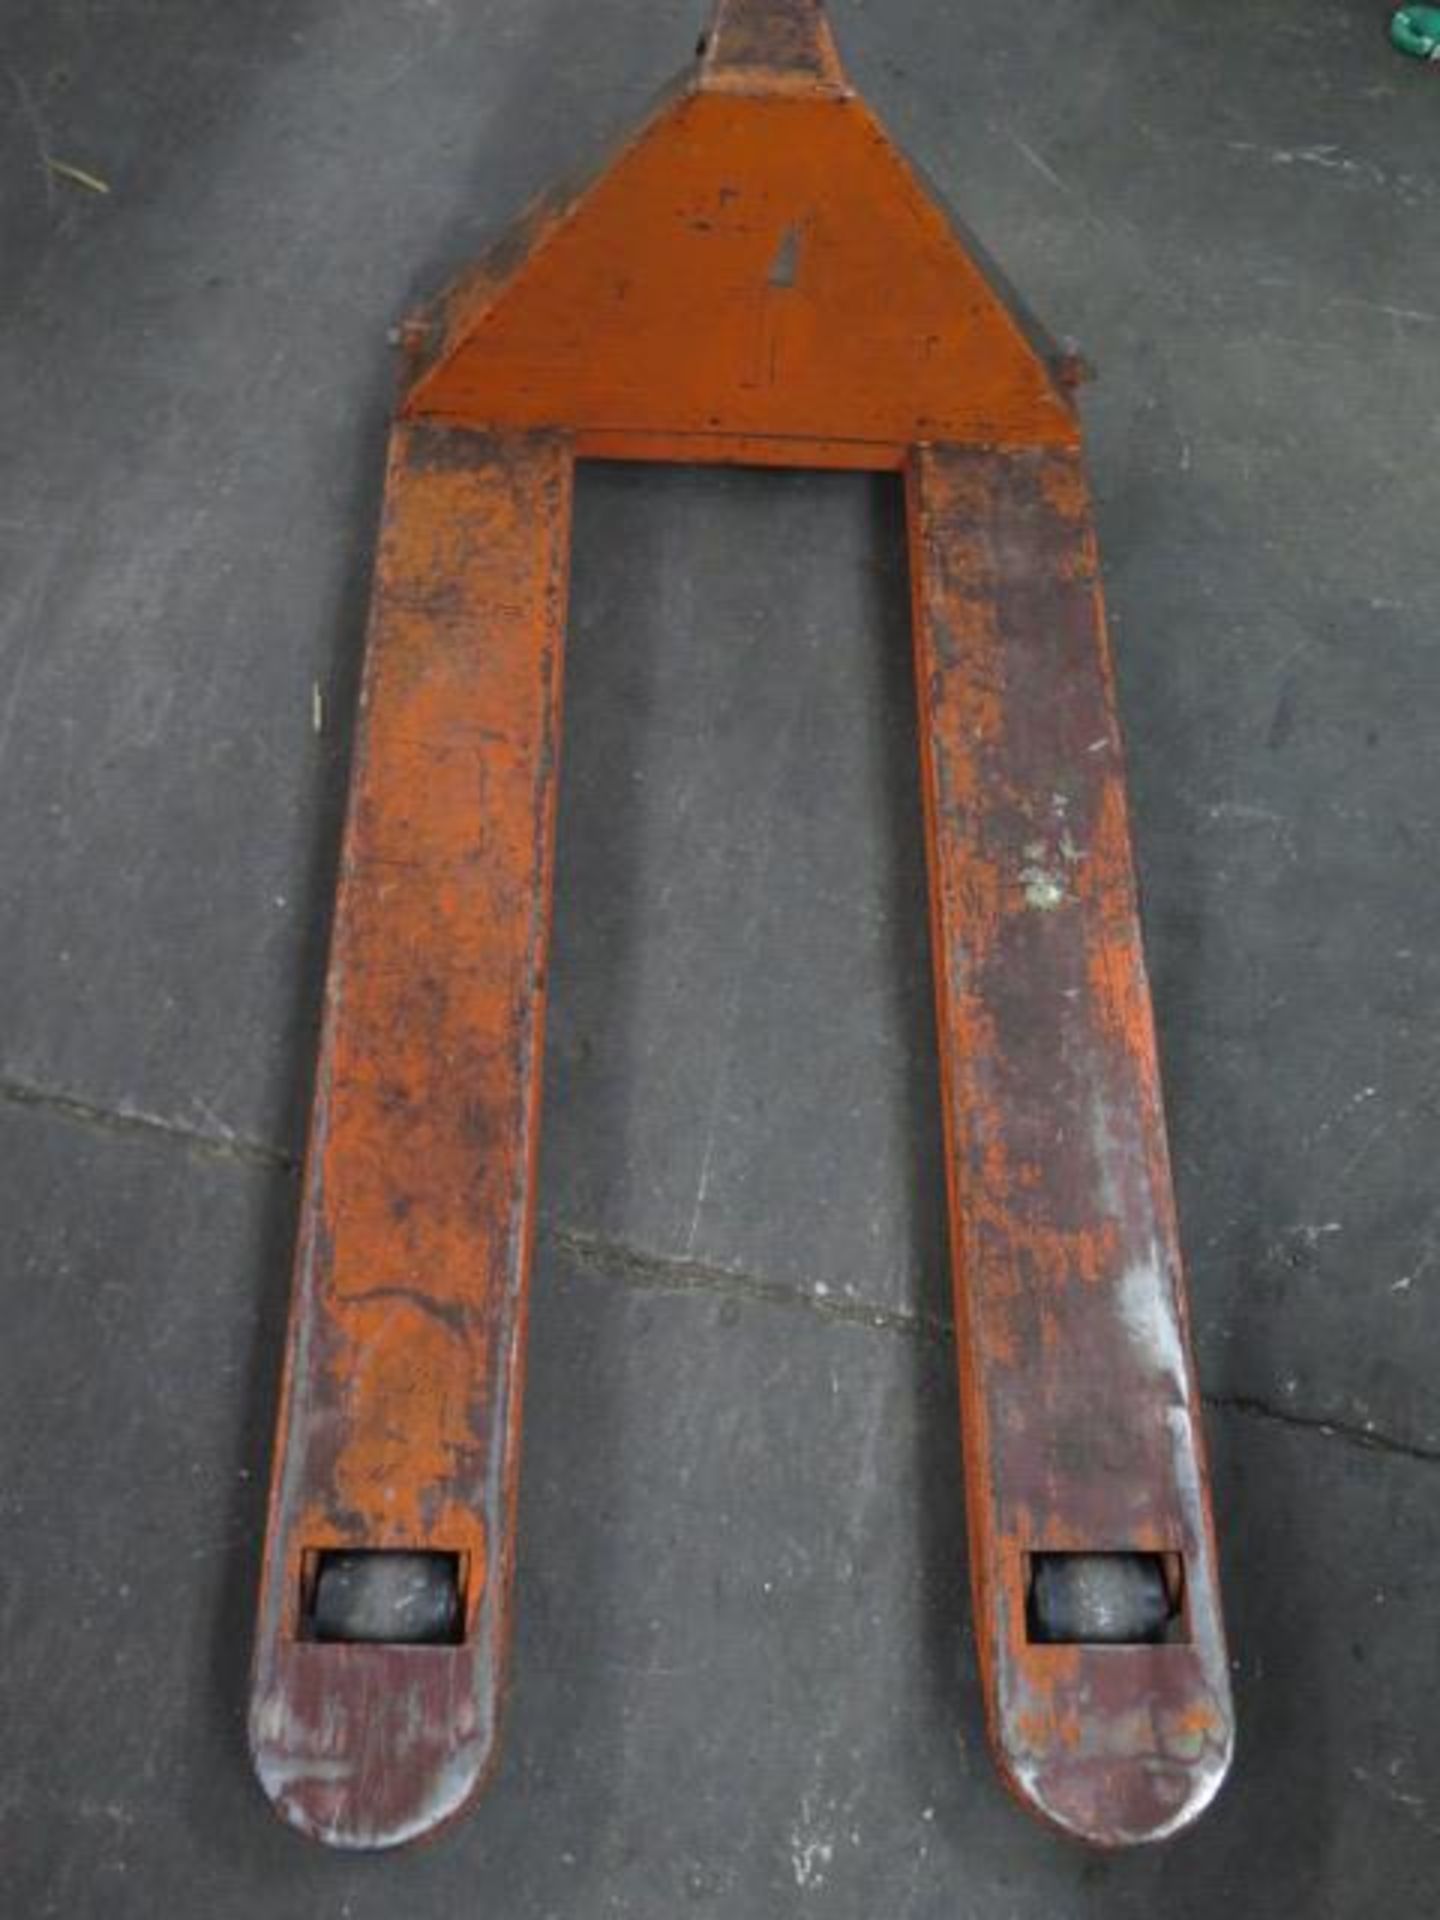 Pallet Jack (SOLD AS-IS - NO WARRANTY) - Image 3 of 4